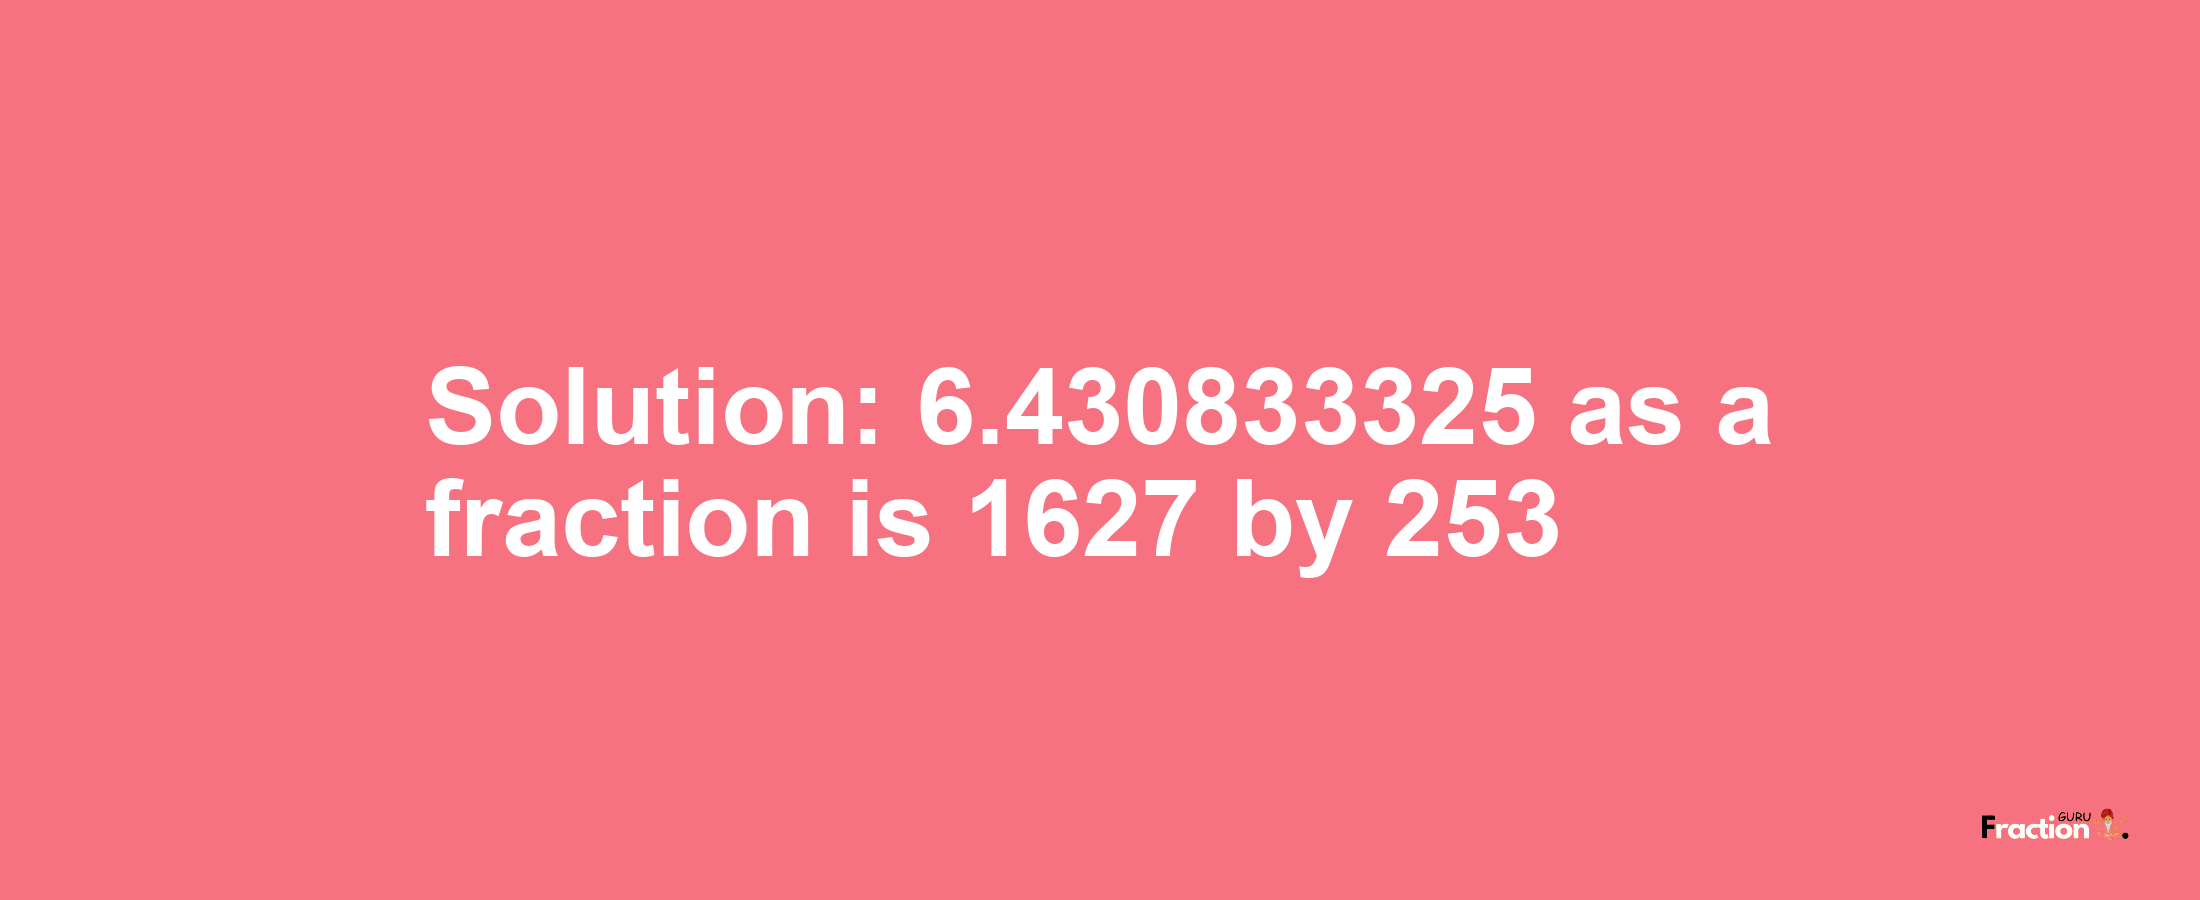 Solution:6.430833325 as a fraction is 1627/253